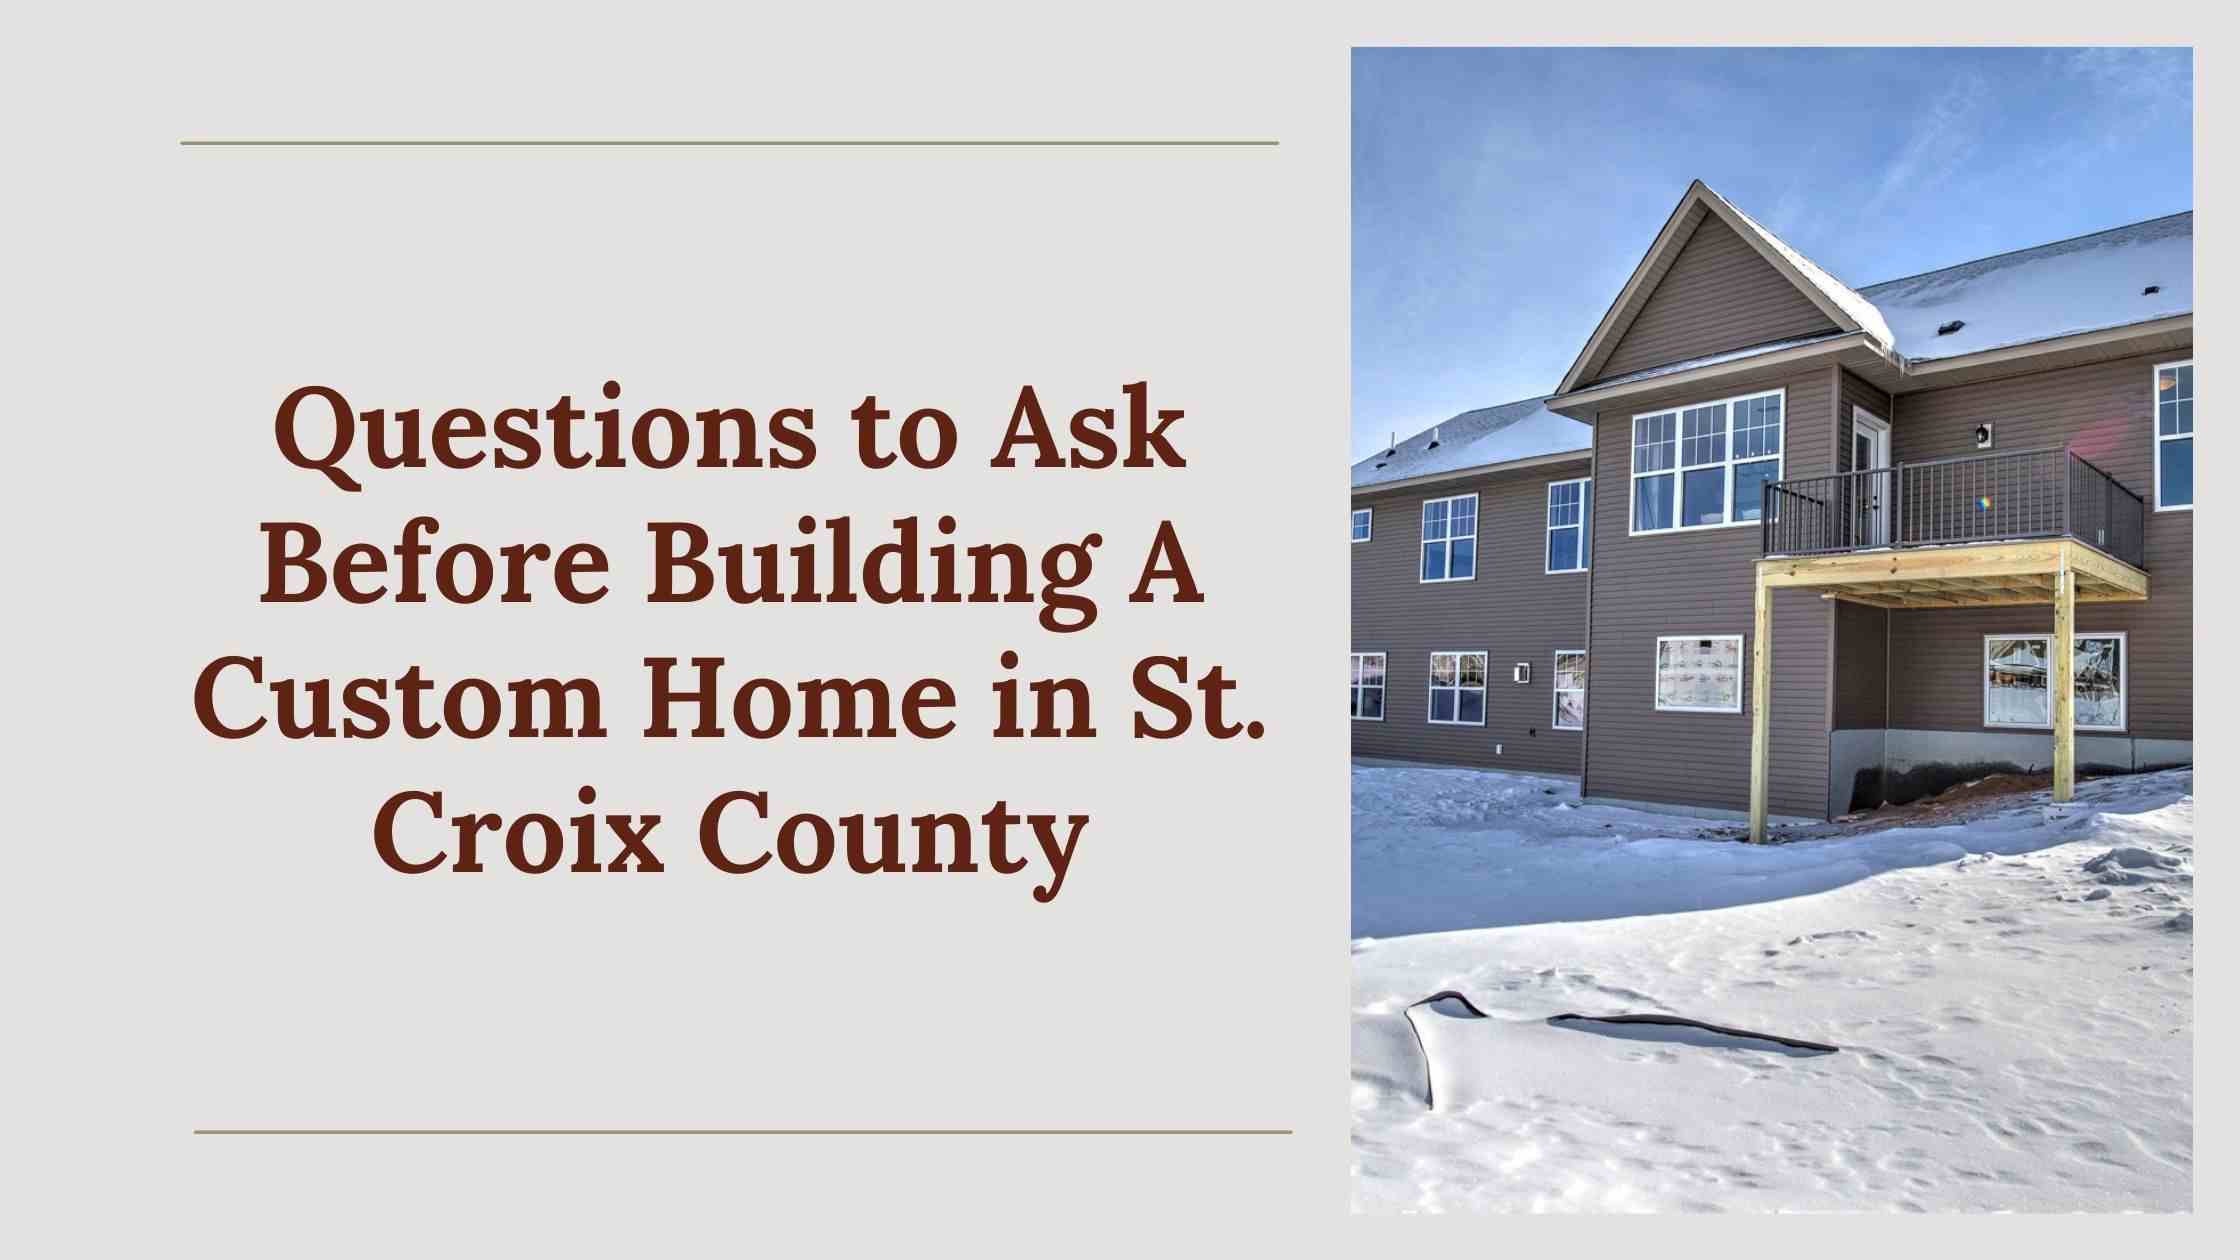 Questions to Ask Before Building A Custom Home in St. Croix County